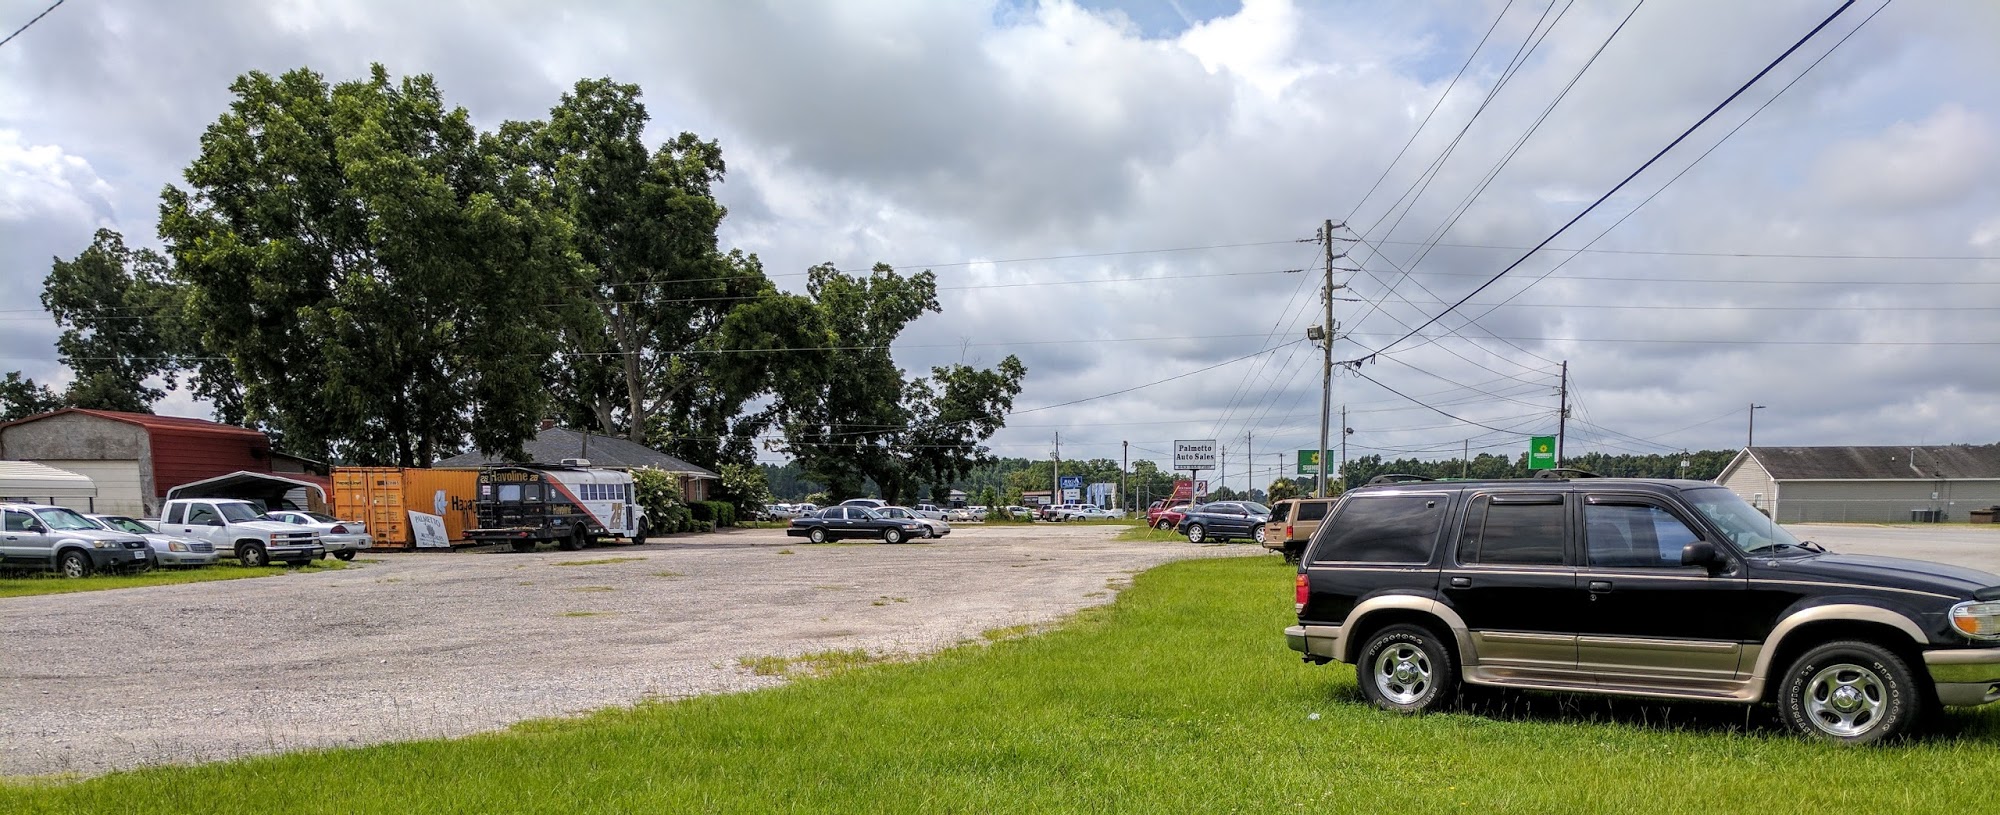 Palmetto Consignments Used Car